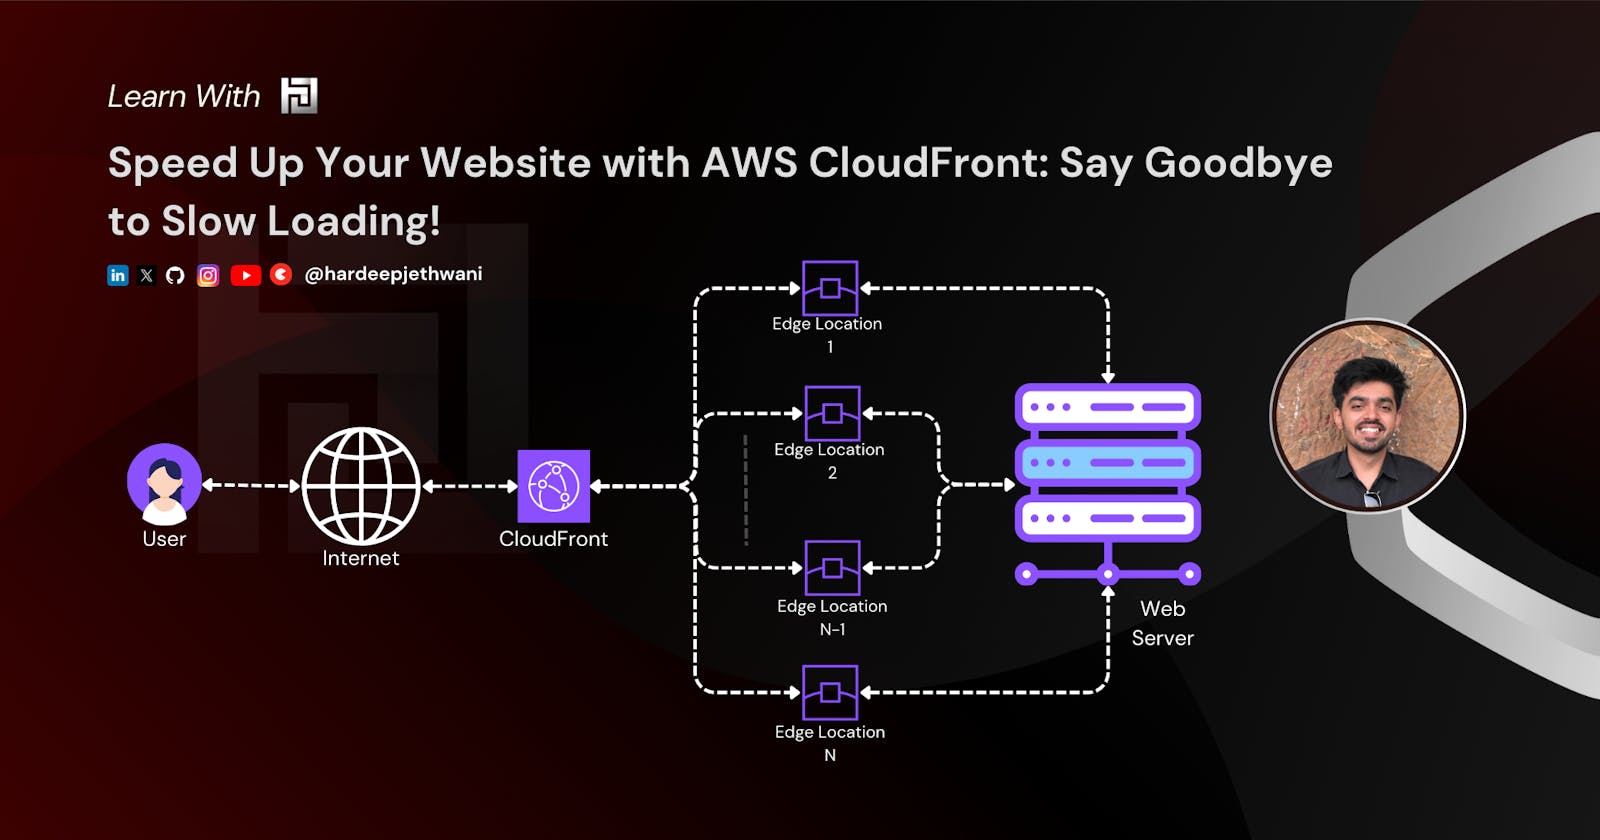 Speed Up Your Website with AWS CloudFront: Say Goodbye to Slow Loading!